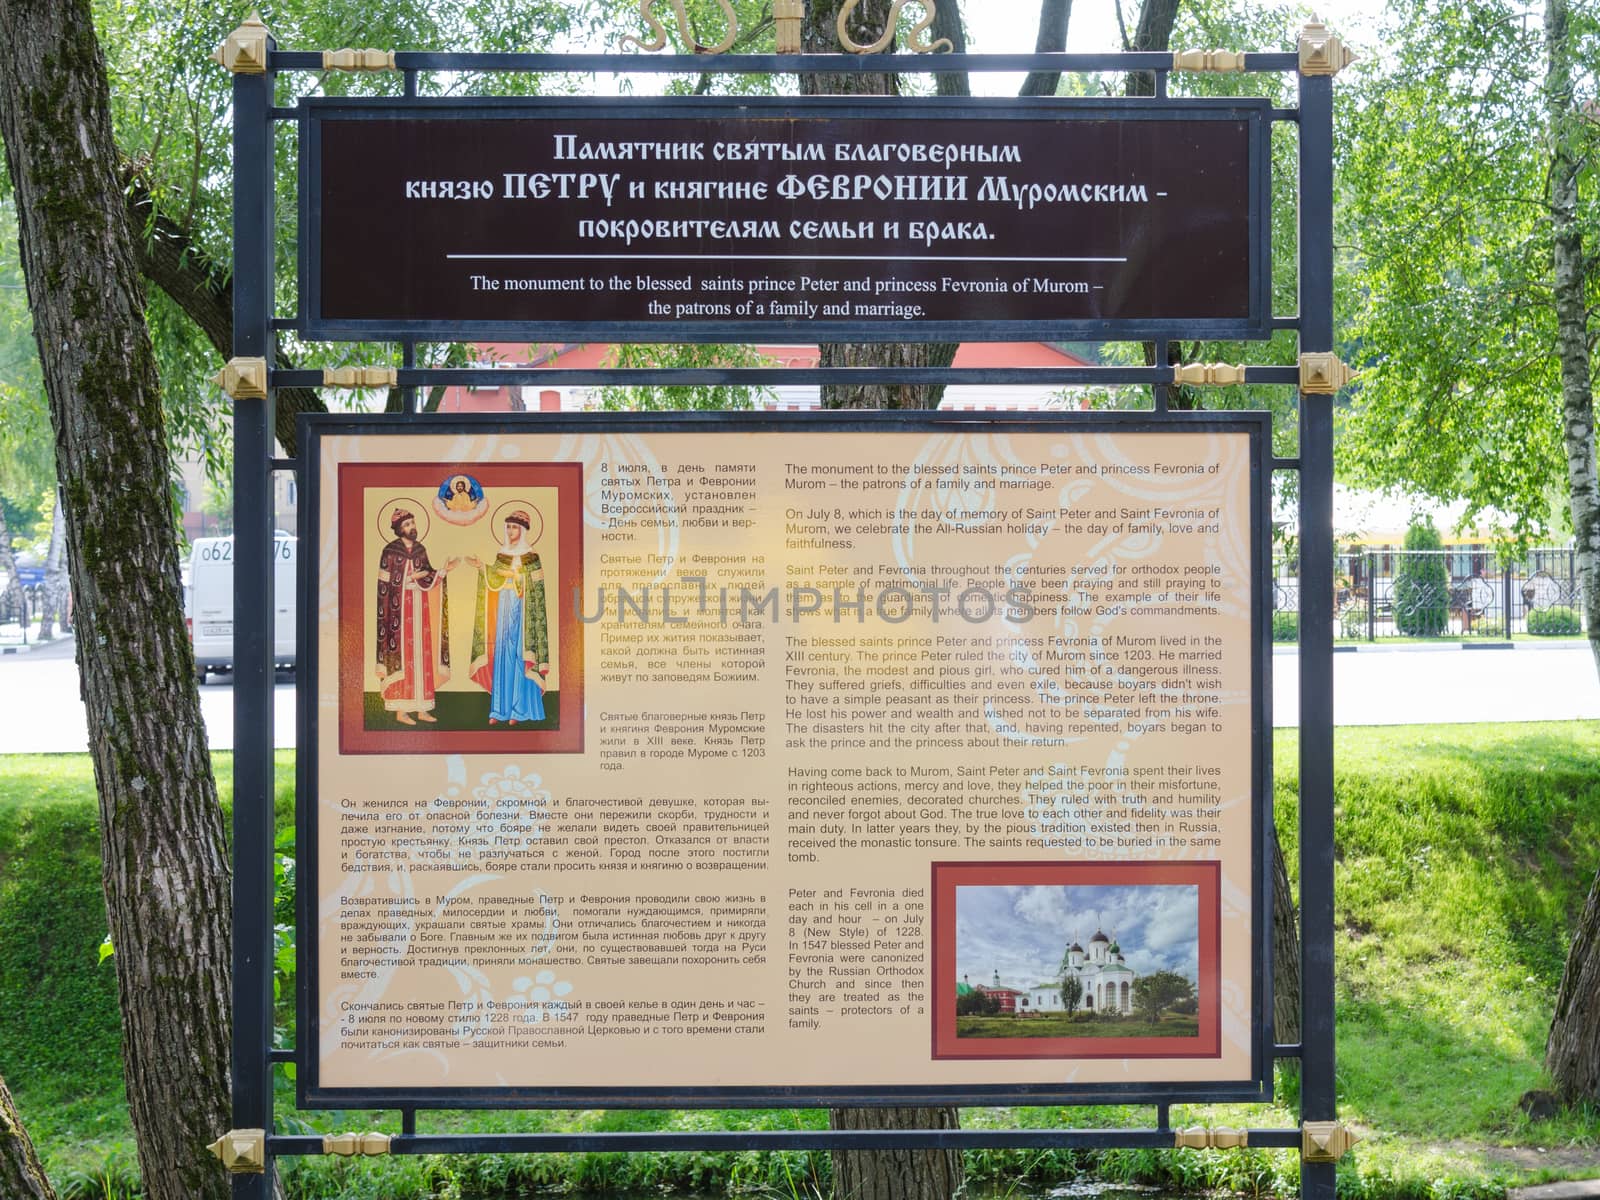 Sergiev Posad - August 10, 2015: Information sign at the twentieth sculpture dedicated to the Holy Prince Petr and Princess Fevronia Murom installed in Sergiev Posad by Madhourse